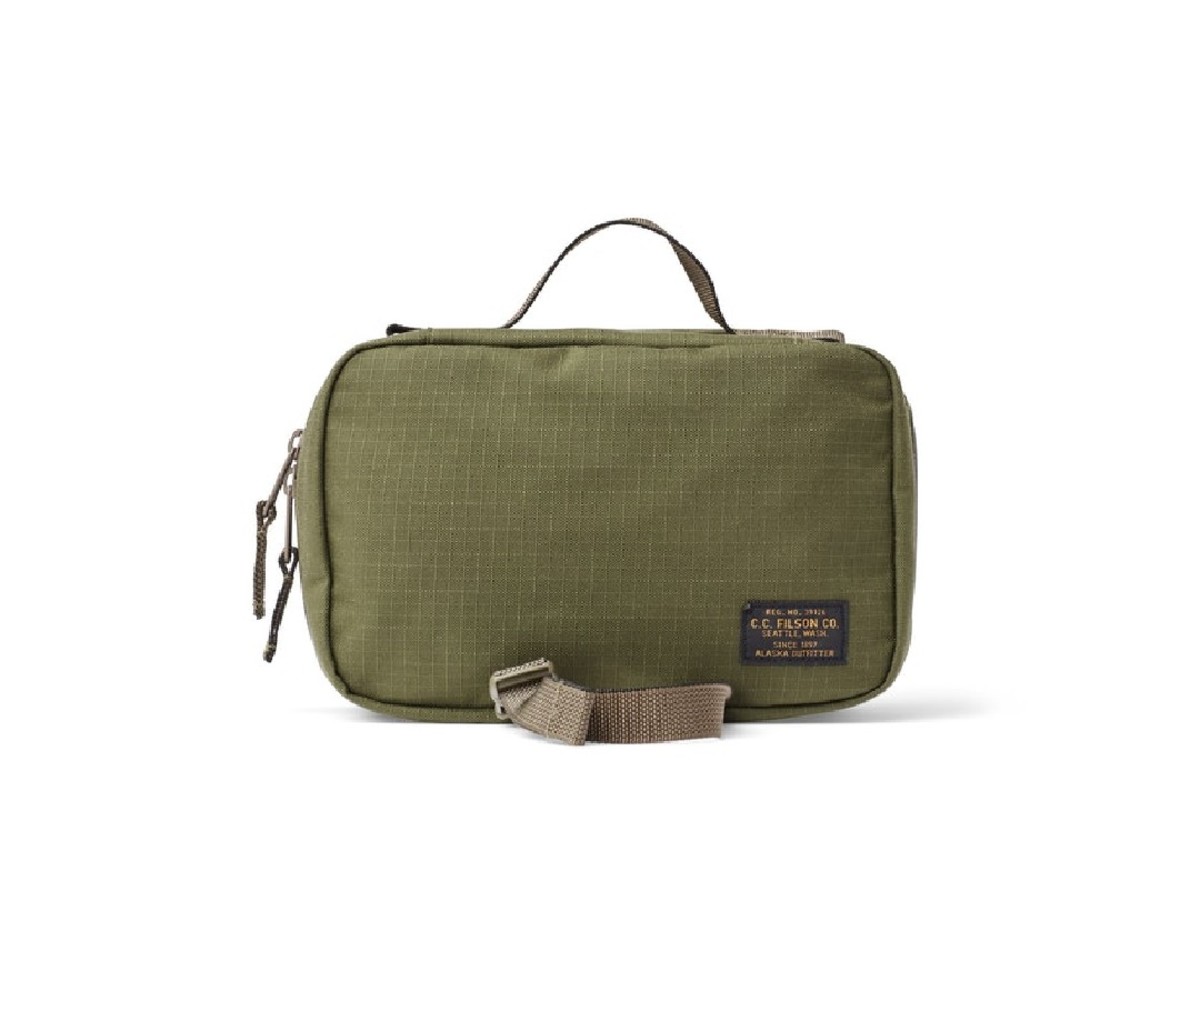 Filson Ripstop Nylon Travel Pack luggage gift guide